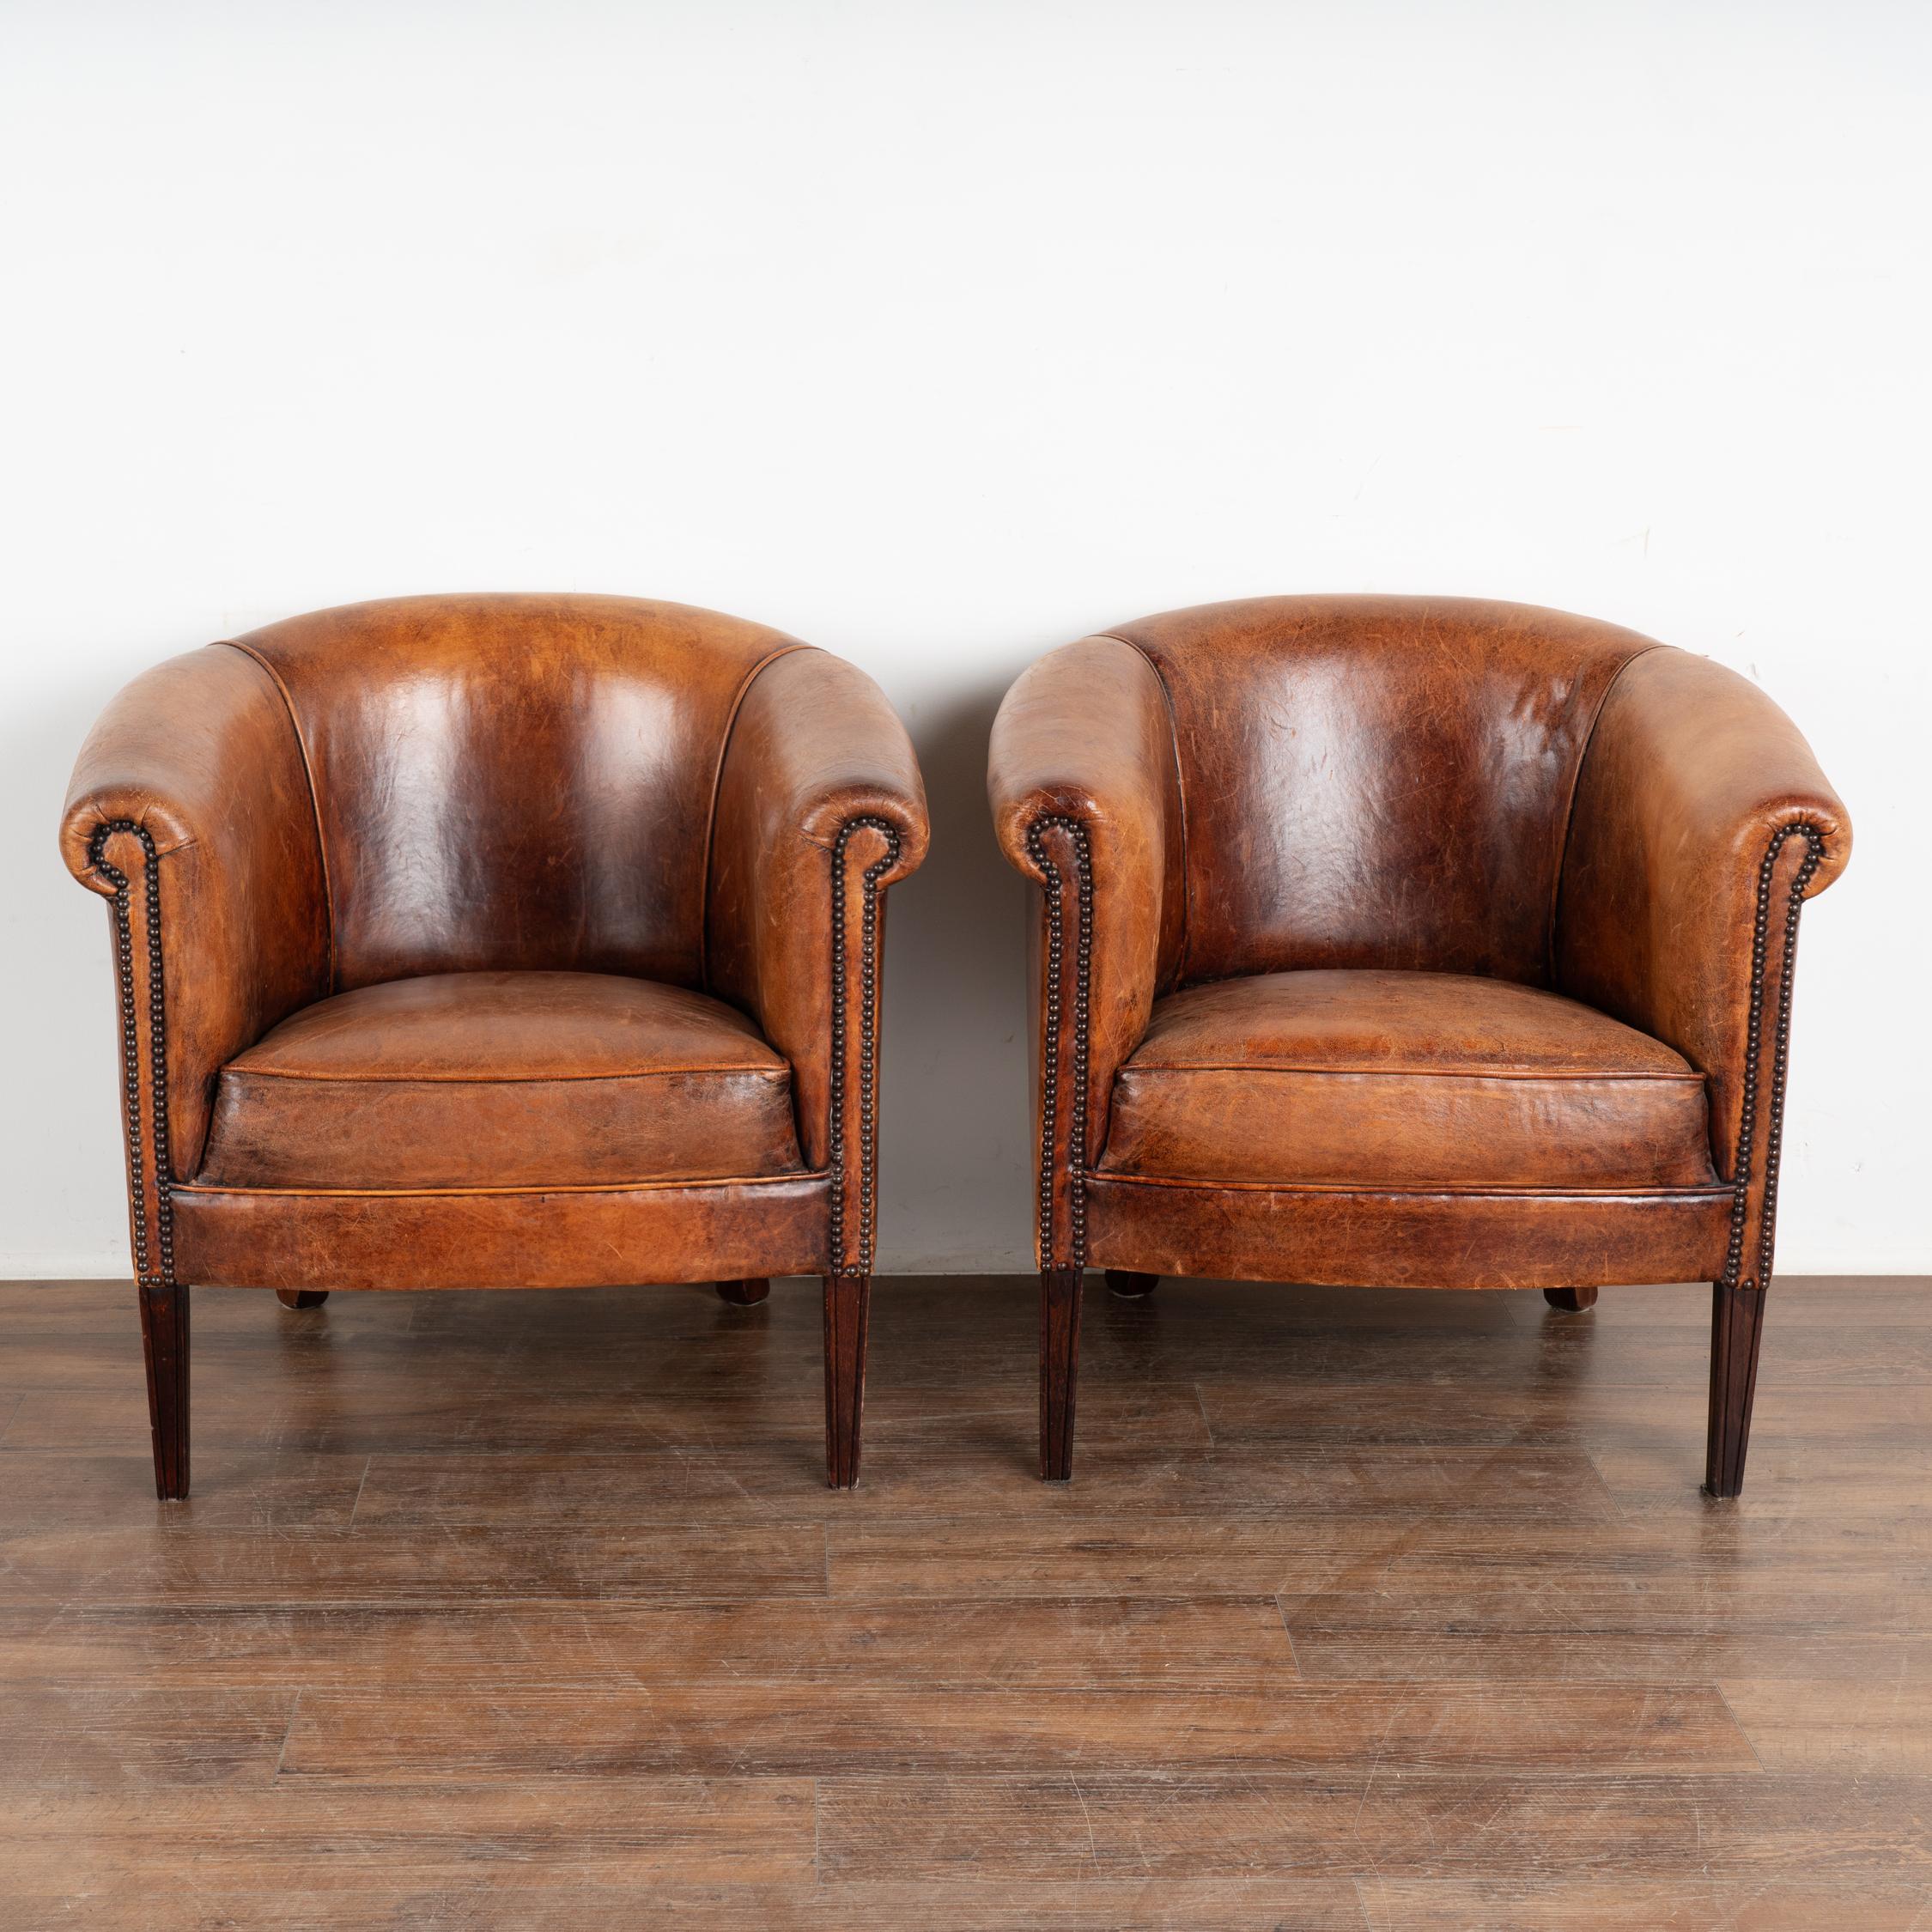 Art Deco Pair, Vintage Brown Leather Club Tub Arm Chairs, The Netherlands 1960-70